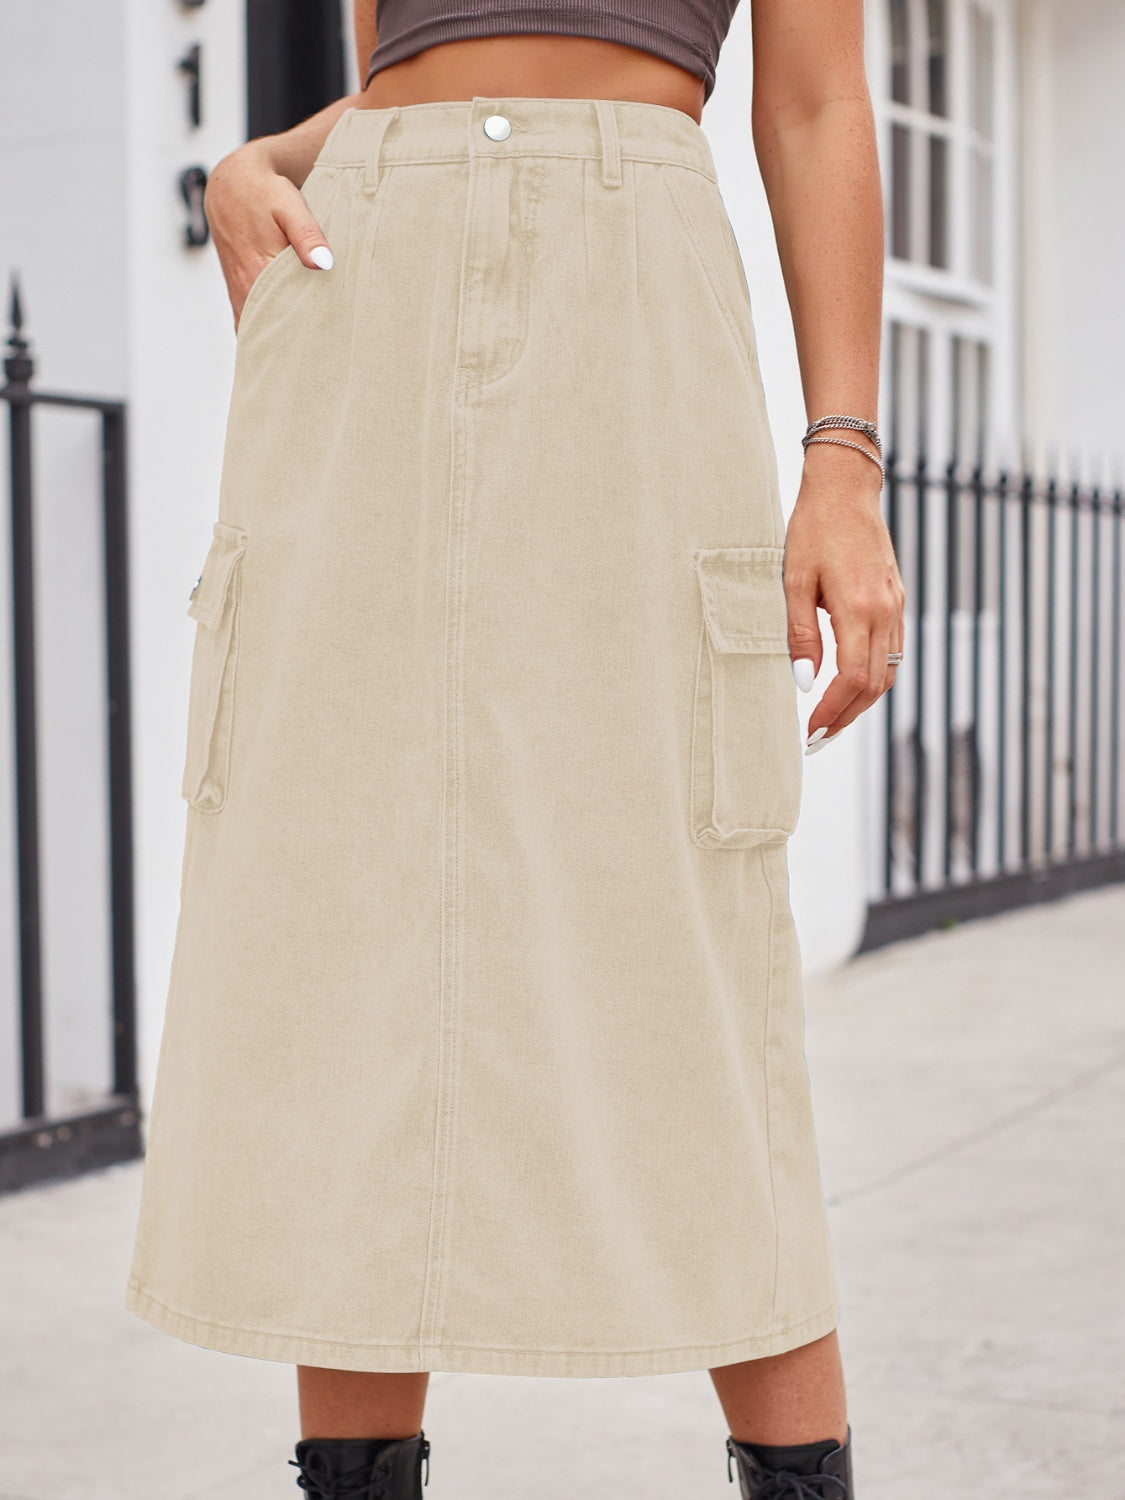 Slit Buttoned Denim Skirt with Pockets  Sunset and Swim   